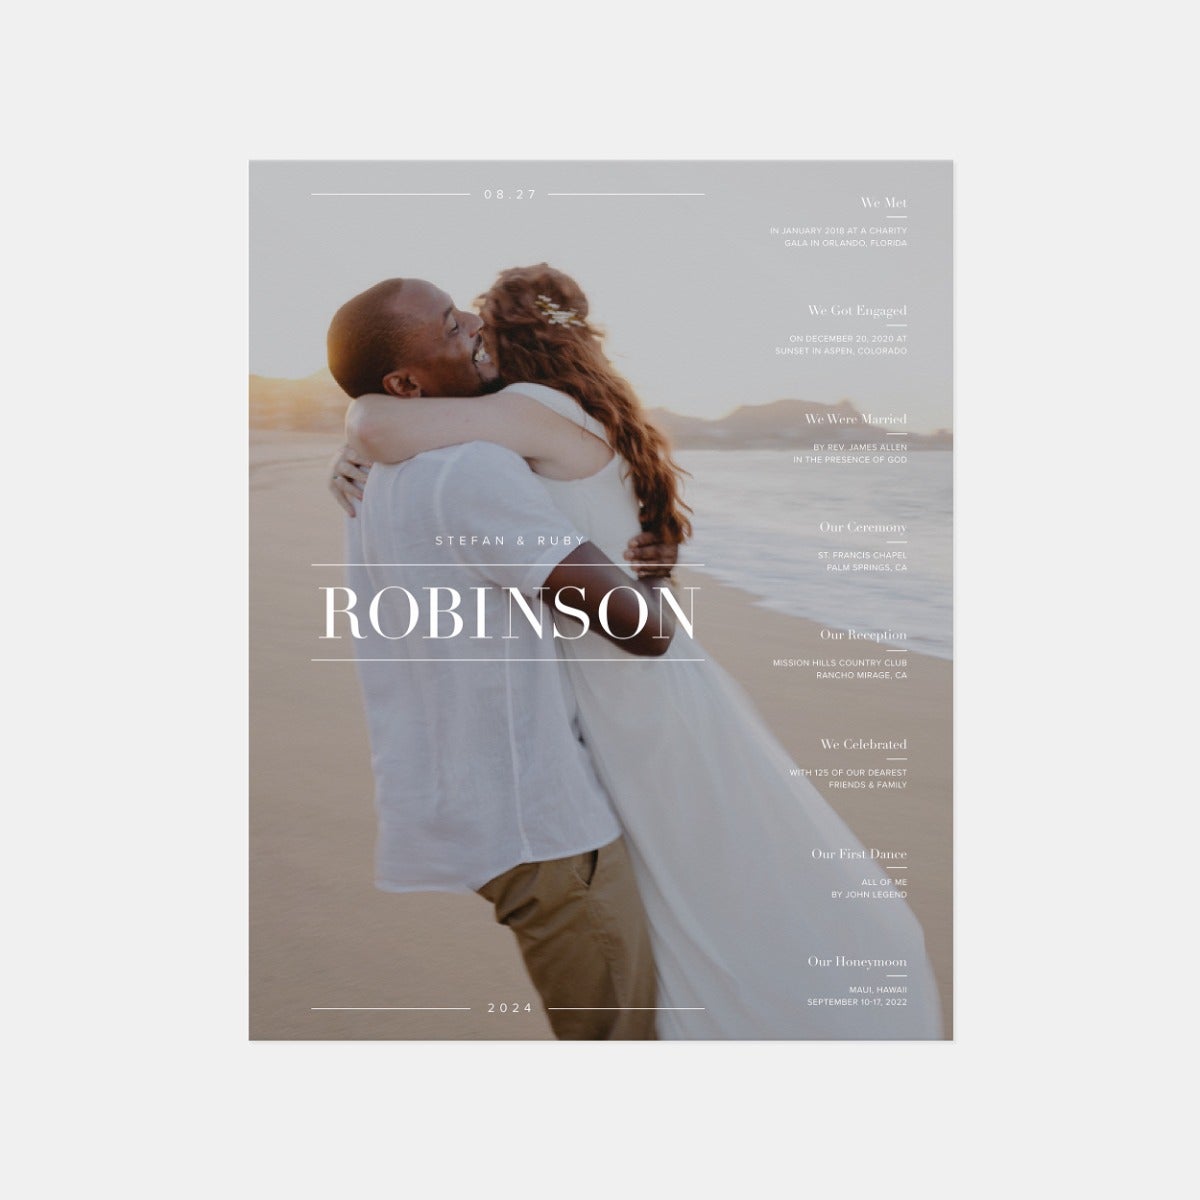 Our Wedding Story Poster Print